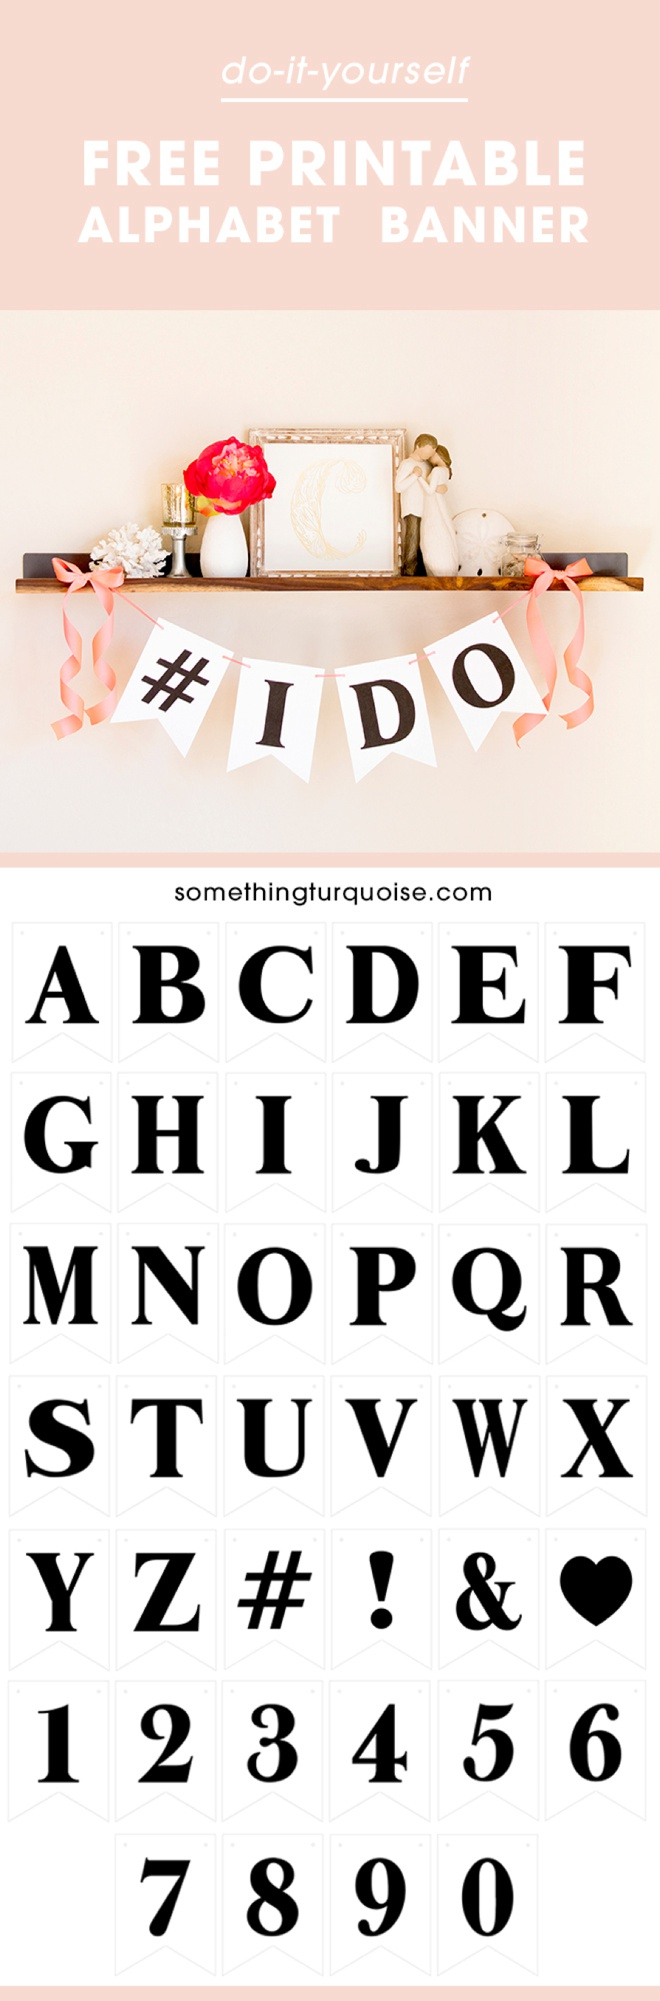 Free Printable Alphabet And Number Banner! Adorable! - Free Printable Whole Alphabet Banner